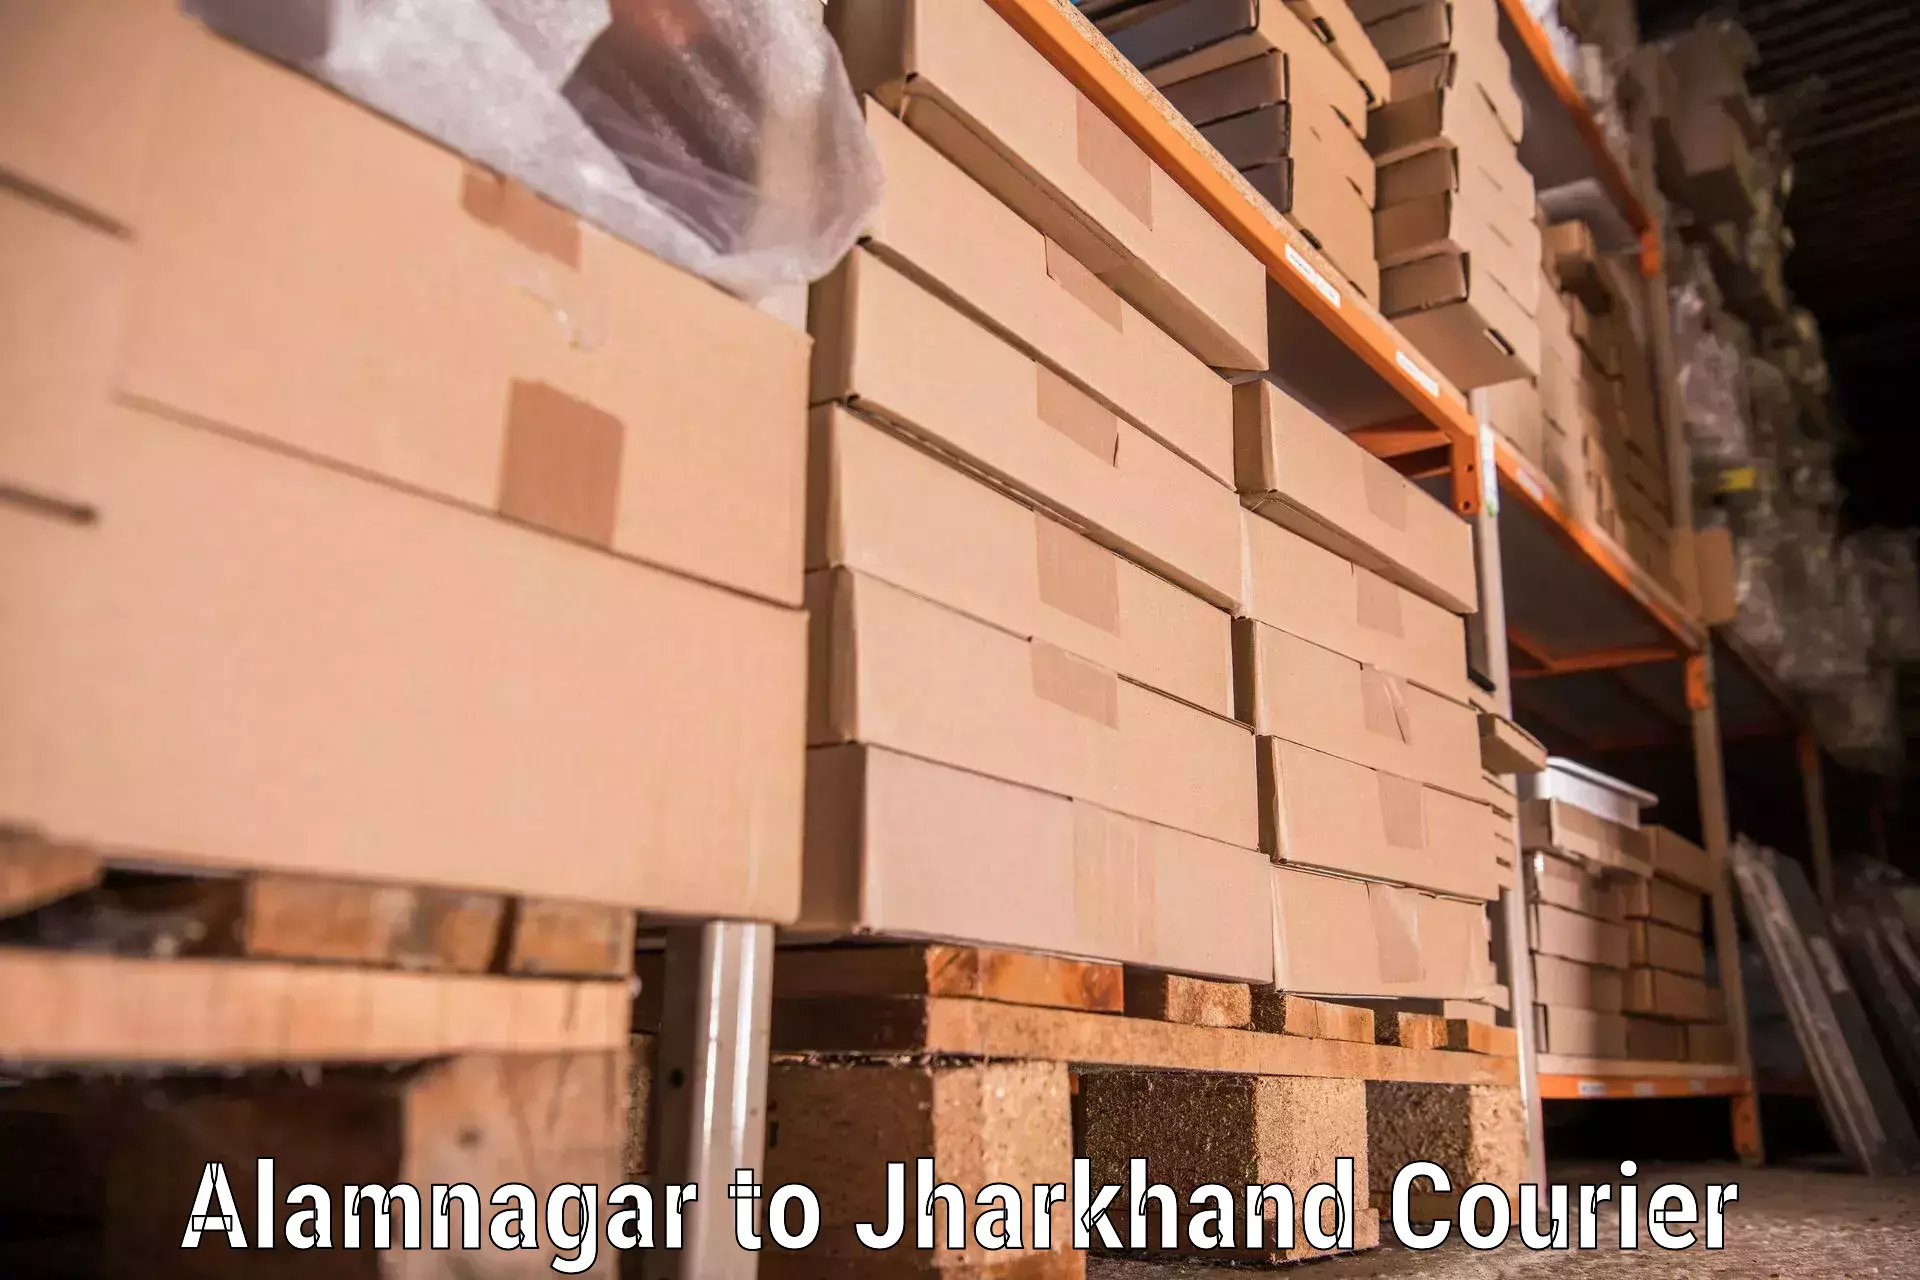 Reliable furniture transport in Alamnagar to Jharia